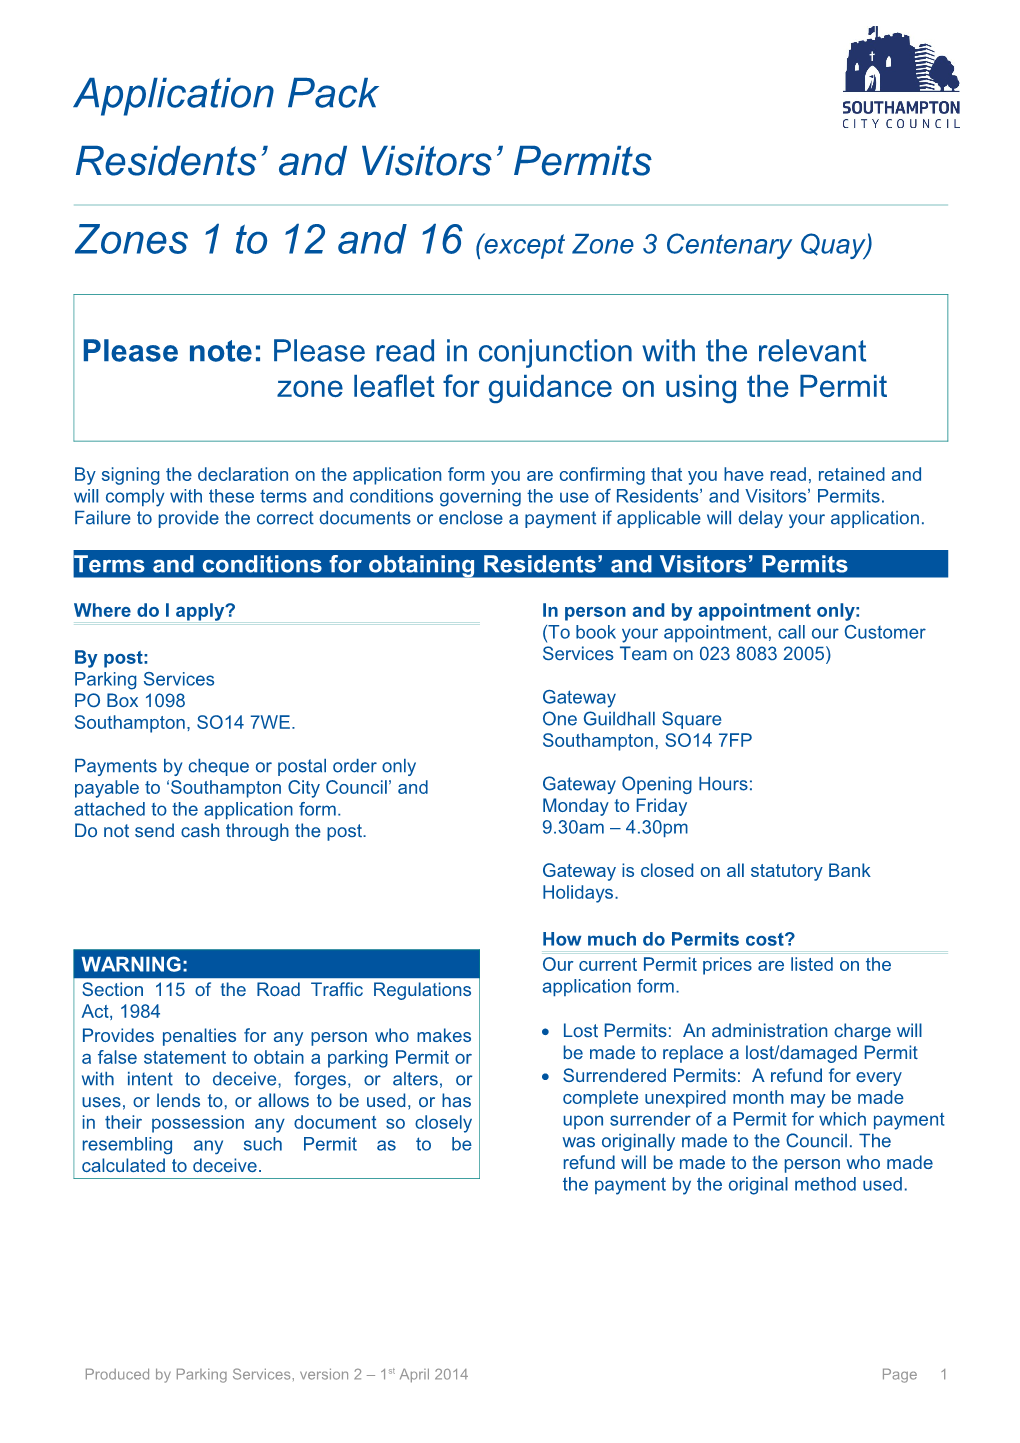 Zones 1 to 12 and 16 Parking Permit Application for Residents and Visitors